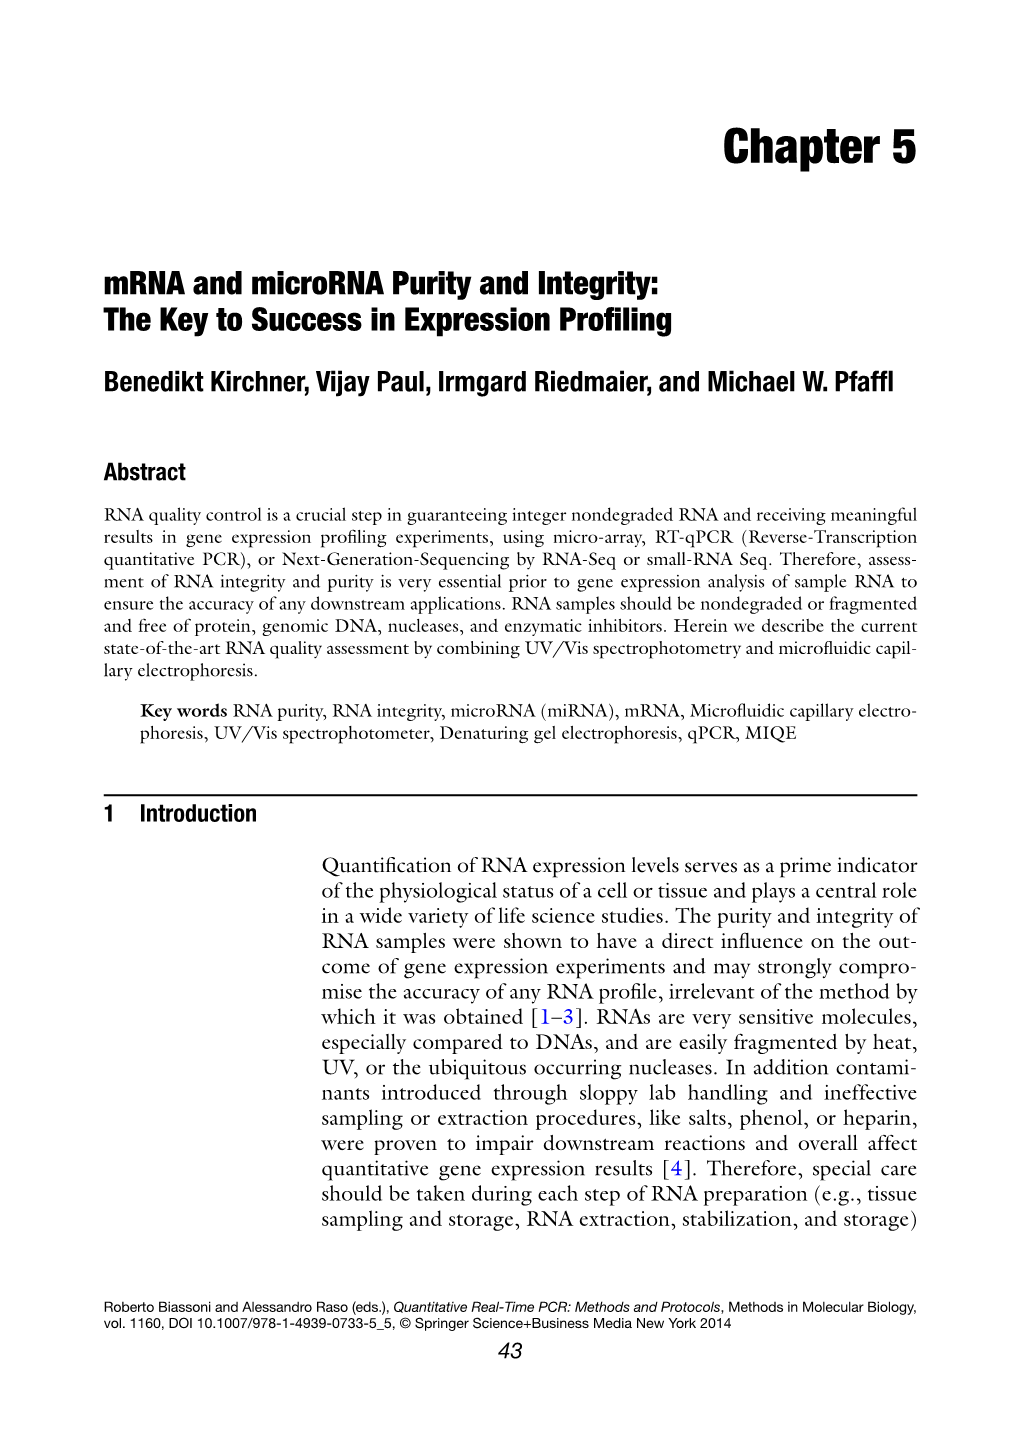 Chapter 5 -- Mrna and Microrna Purity and Integrity